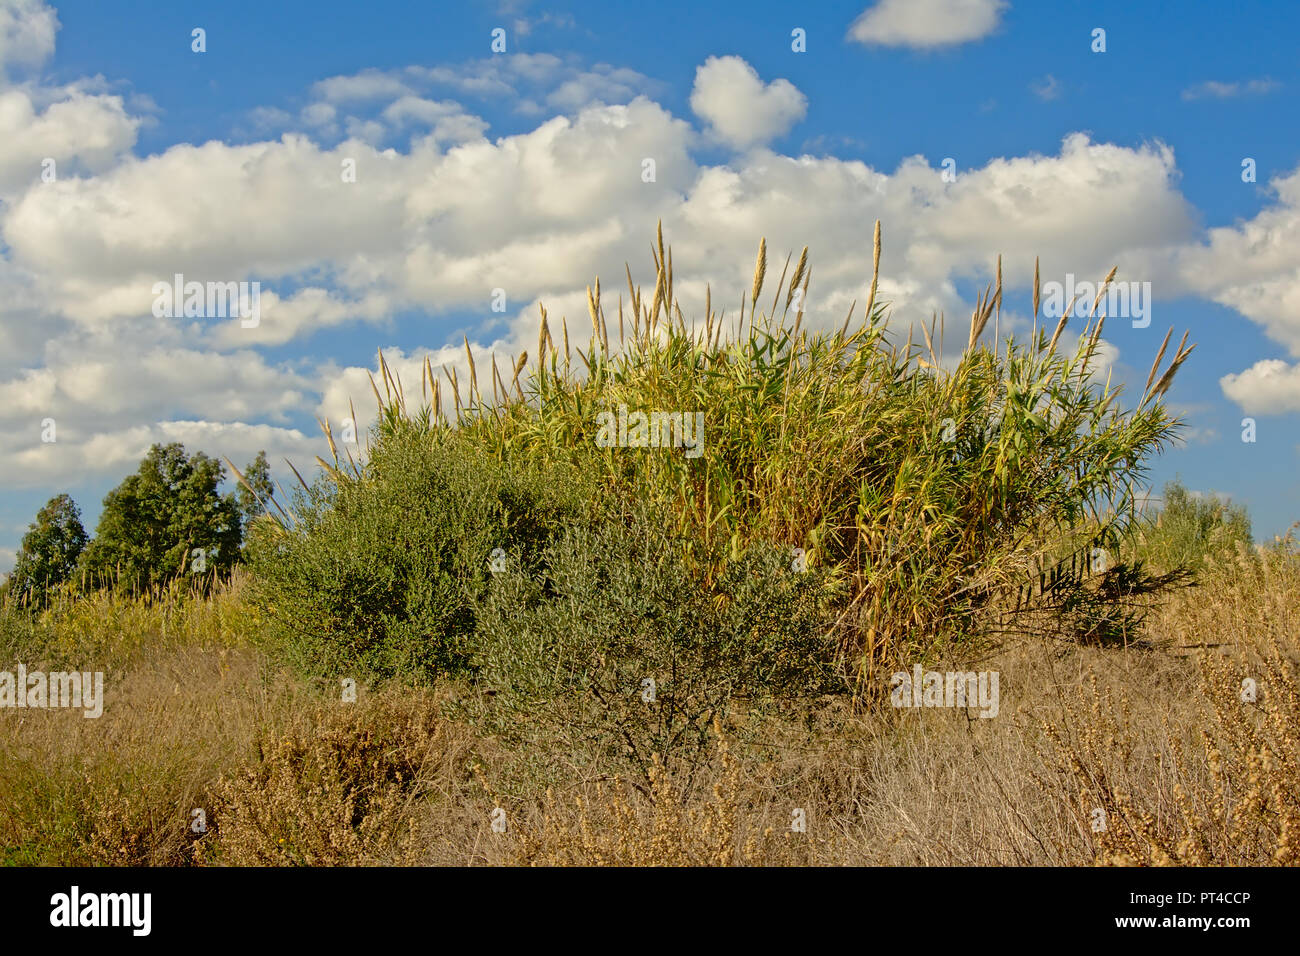 Sunny giant reeds under a blue sky with soft clouds in Guadalhorce river estuary nature reserve in Malaga - Arundo donax Stock Photo